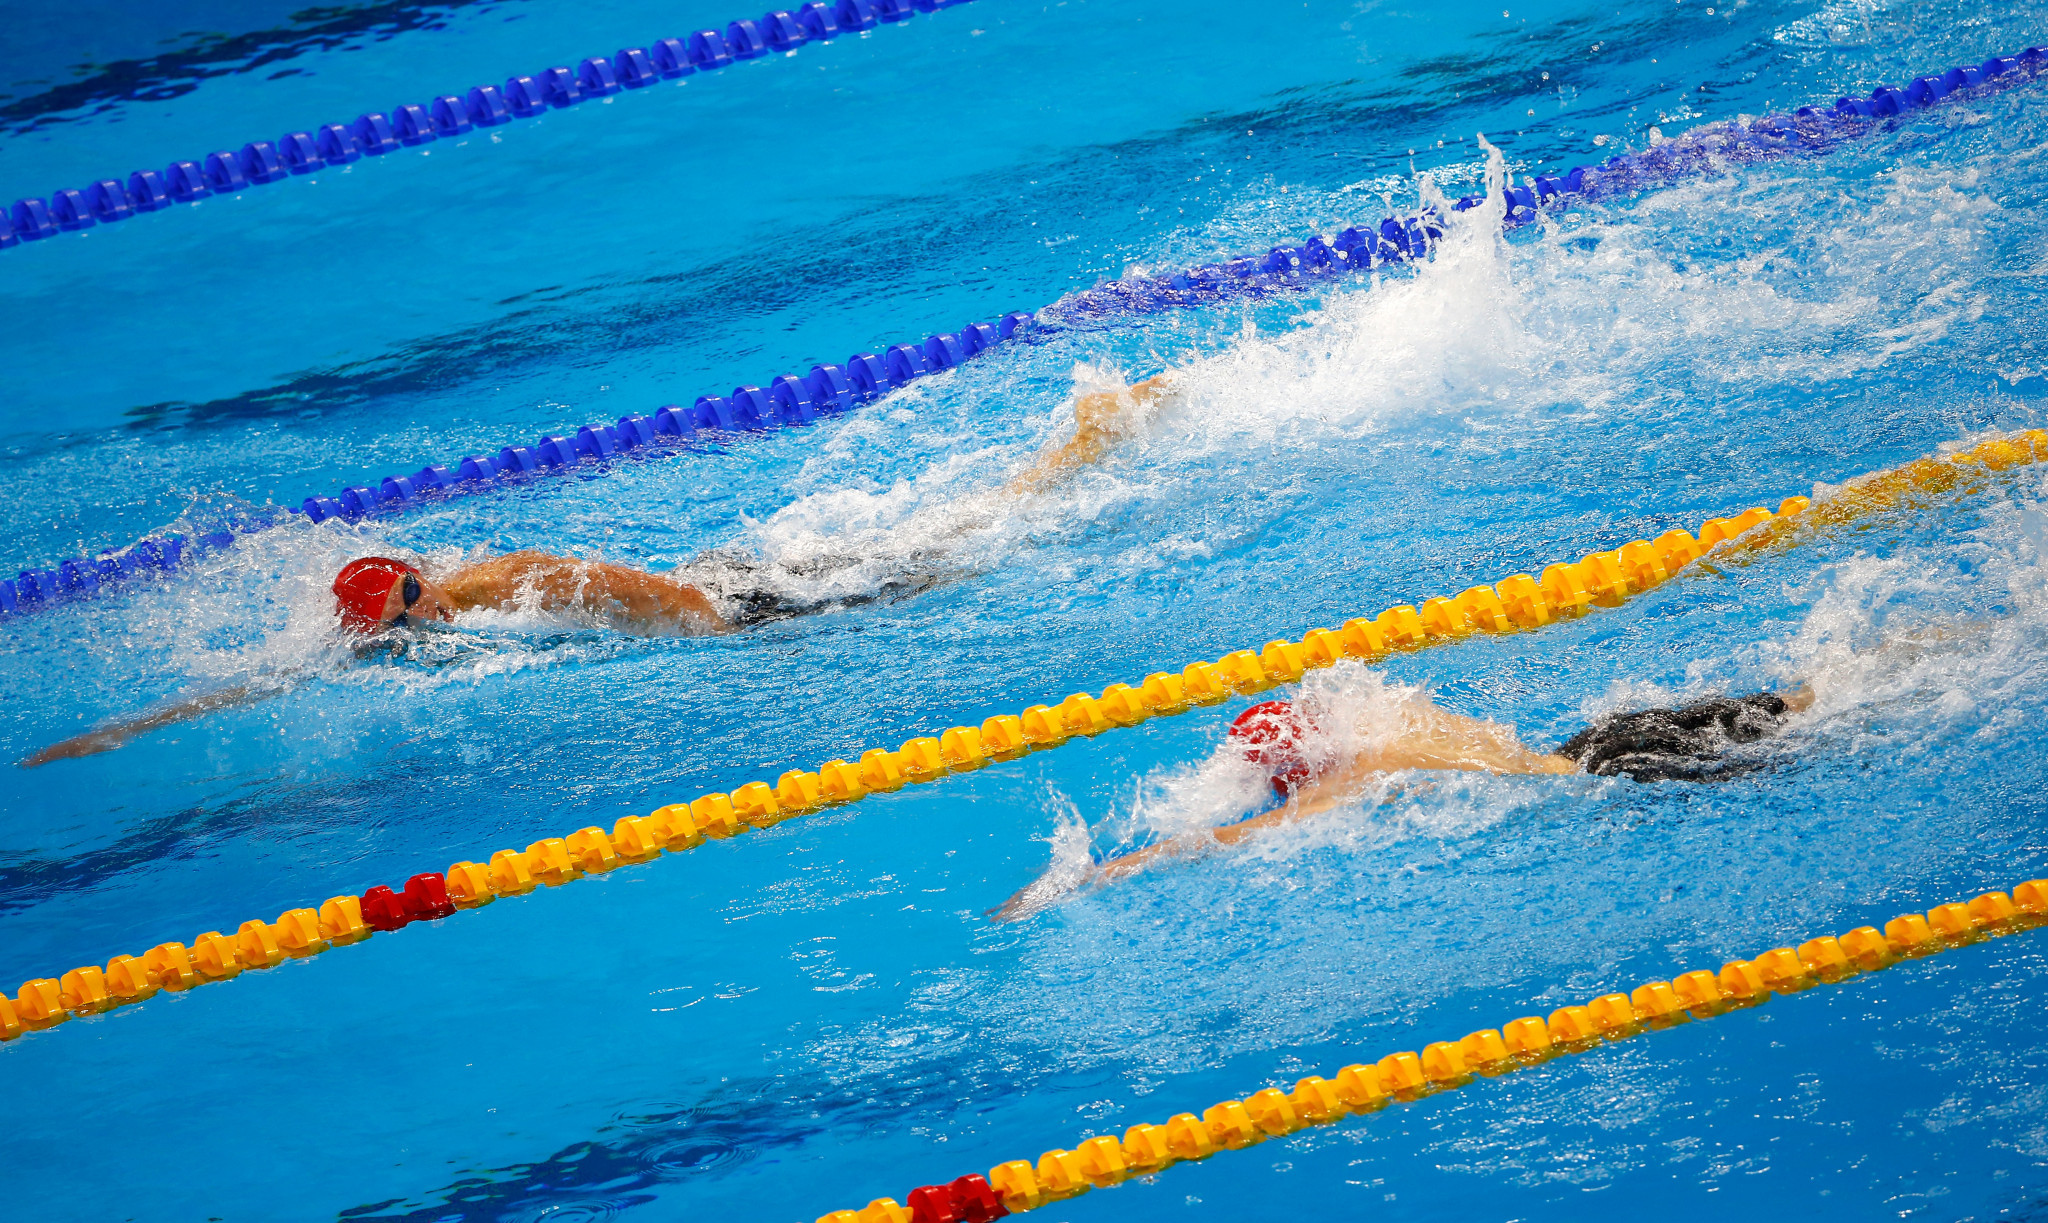 Only junior swimming competitions were held at the Baku 2015 European Games ©Getty Images